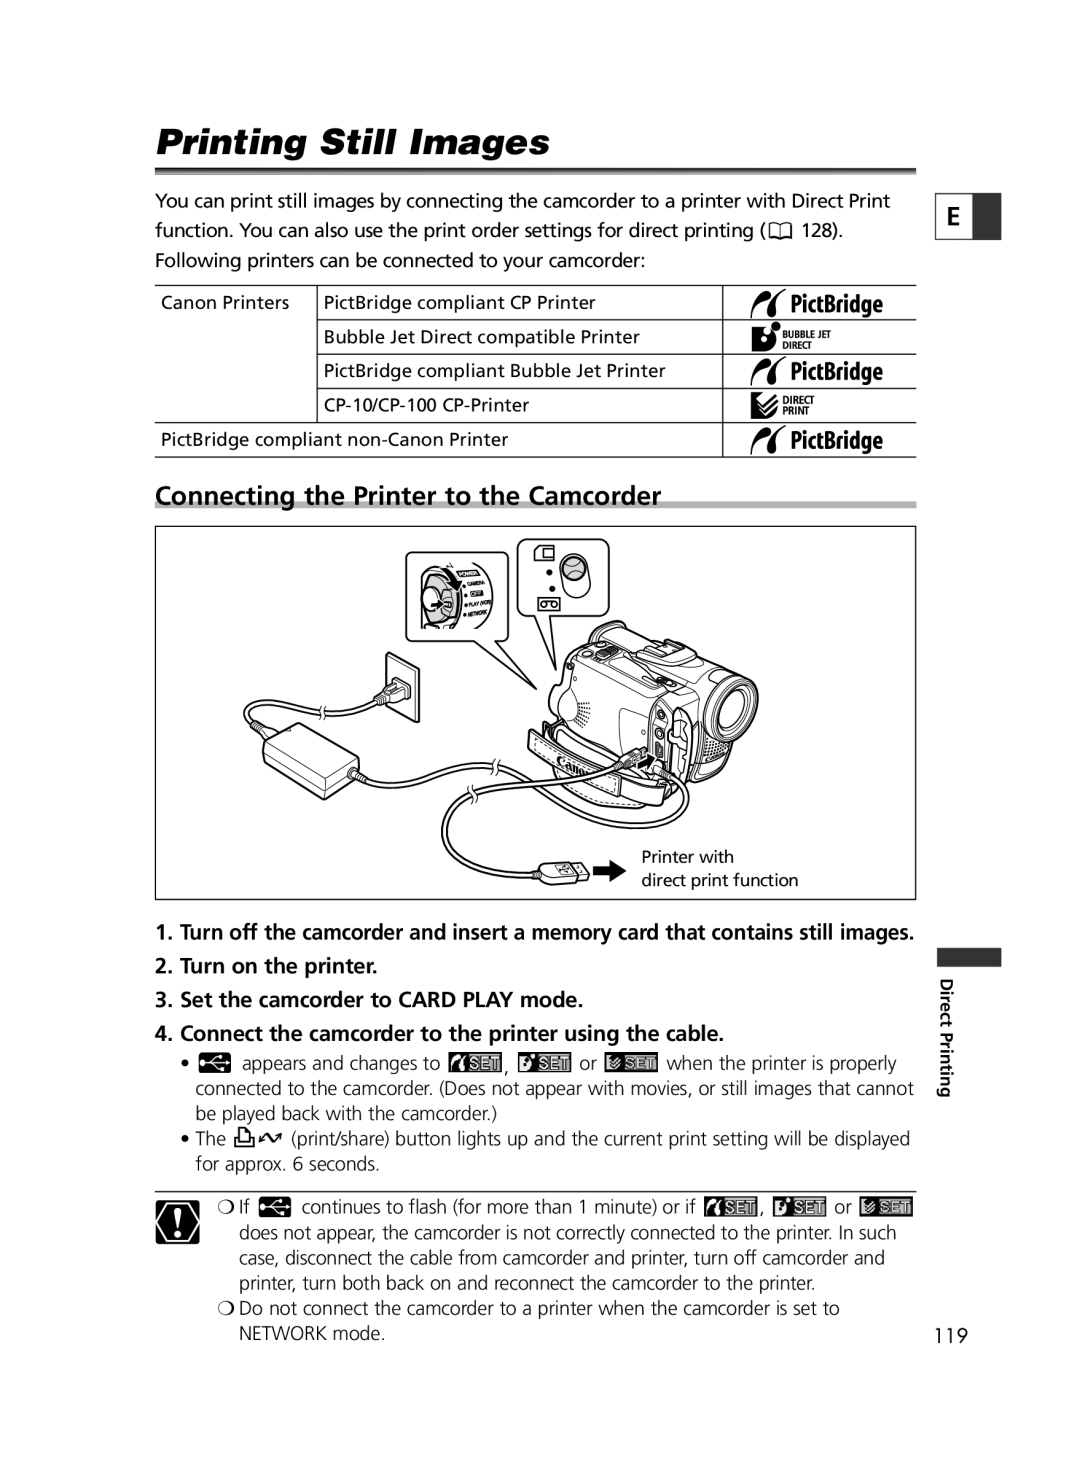 Canon 65, 60 instruction manual Printing Still Images, Connecting the Printer to the Camcorder 